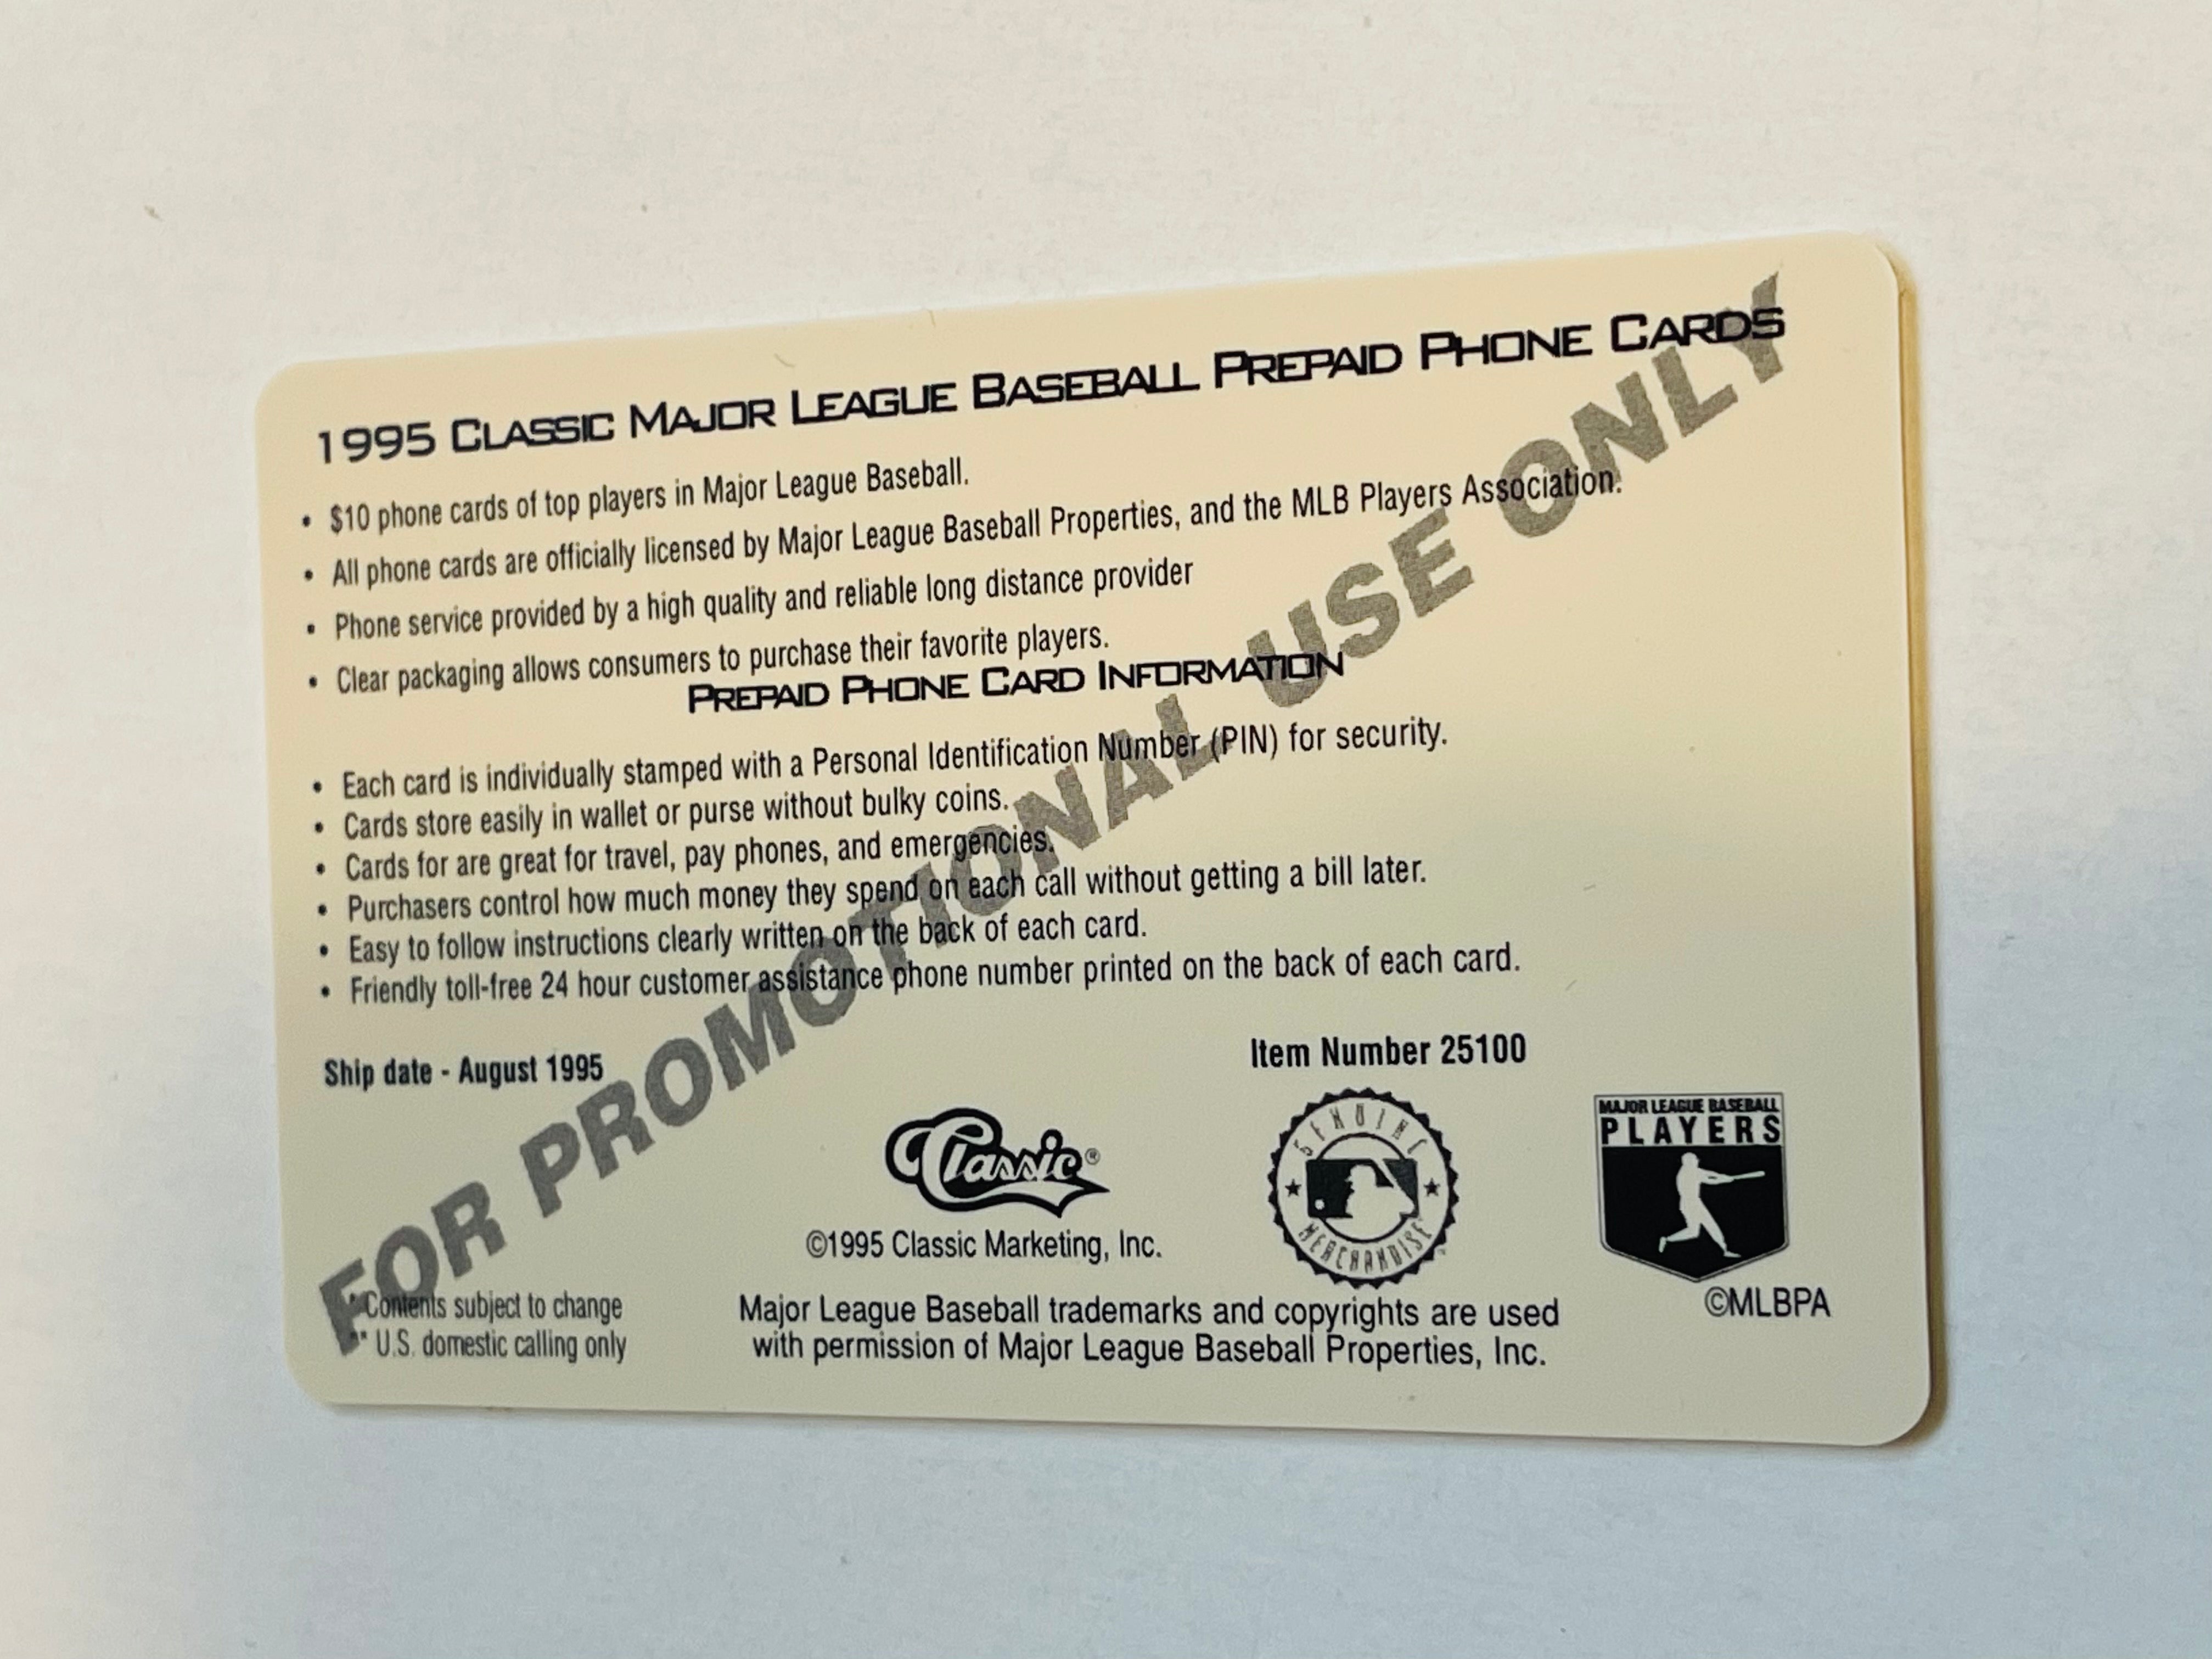 Cooperstown baseball rare promotional phone card